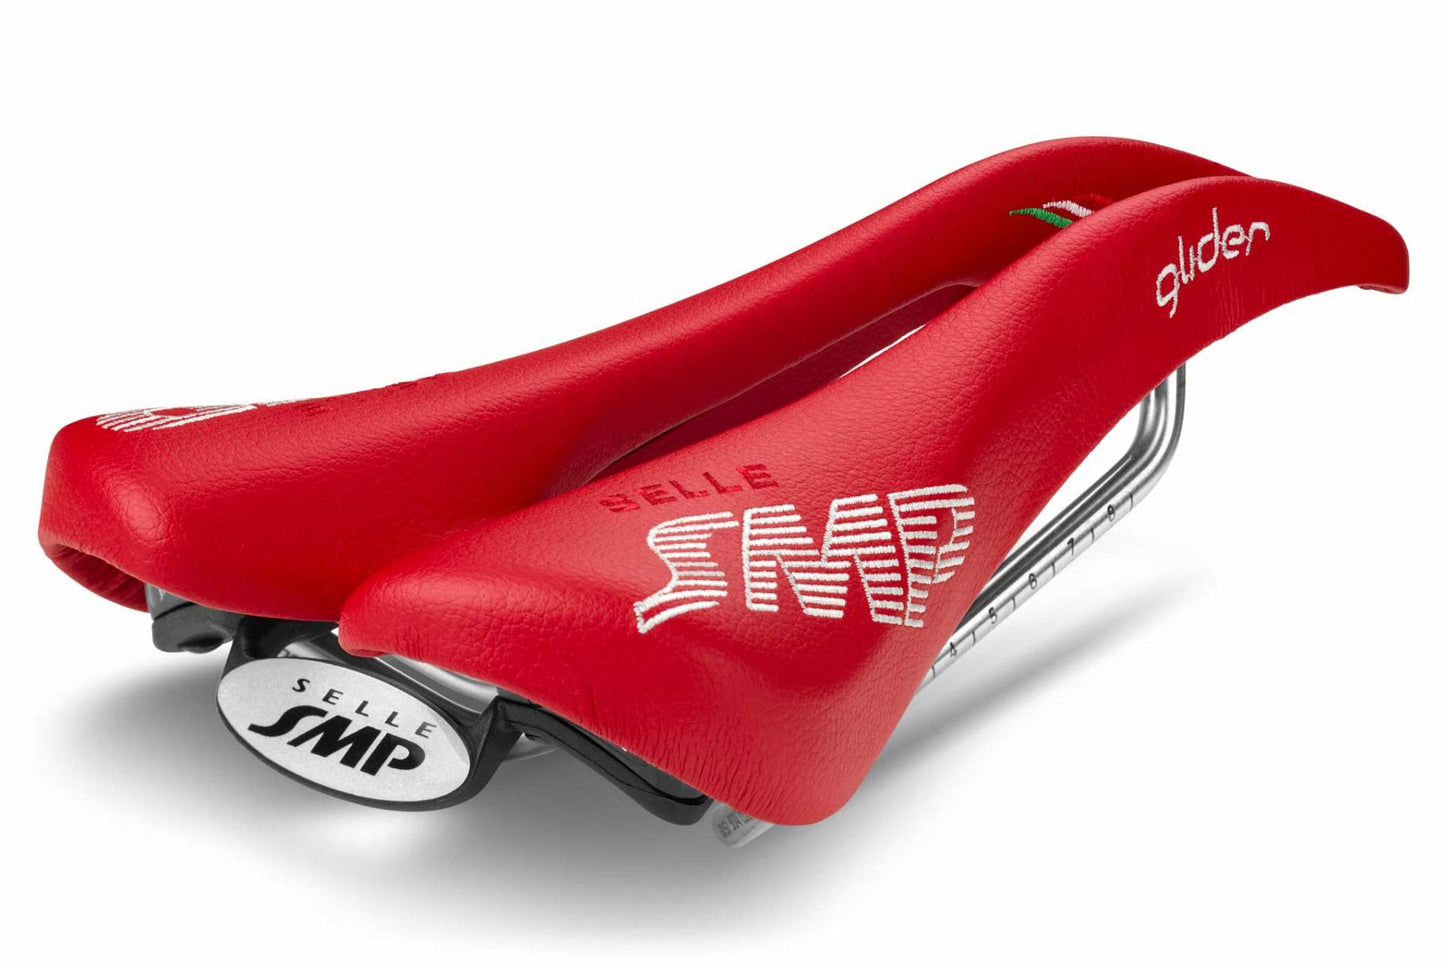 Selle SMP Glider Pro Saddle with Steel Rails